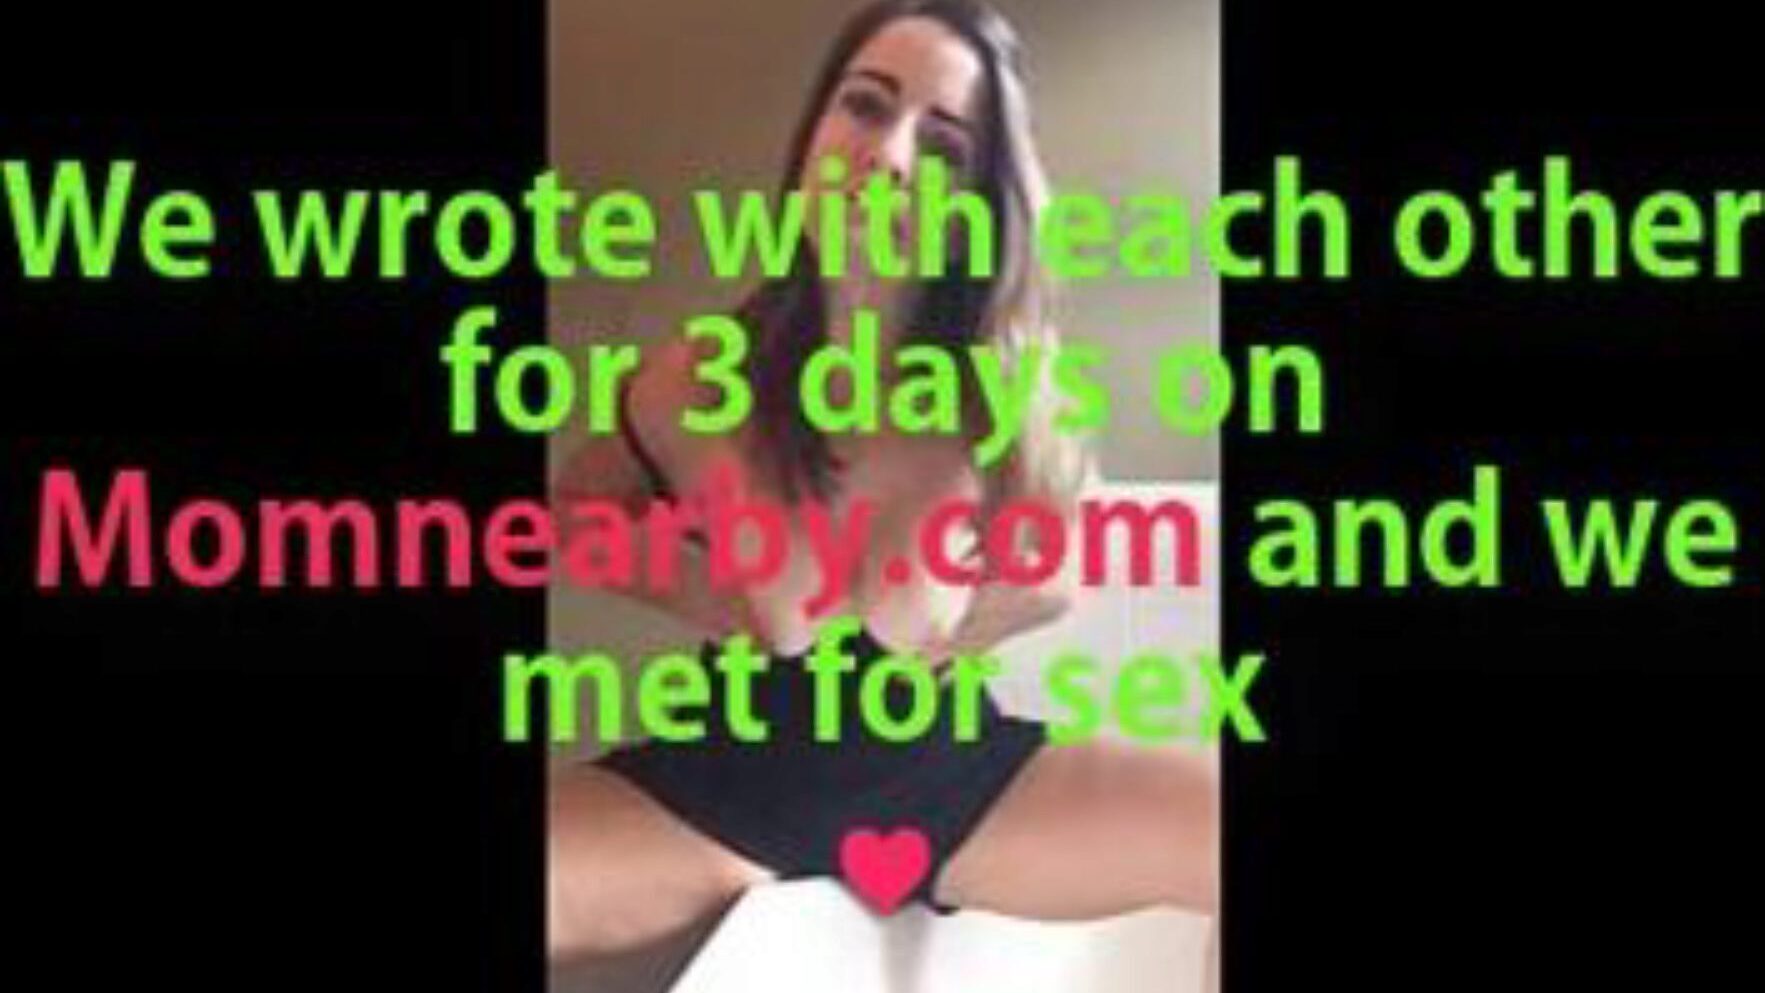 My Fuck Date from Internet, Free Fuck Pornhub Porn Video 77 Watch My Fuck Date from Internet video on xHamster, the huge hump tube web resource with tons of free Fuck Pornhub Internet Date & mother I'd like to fuck porn videos